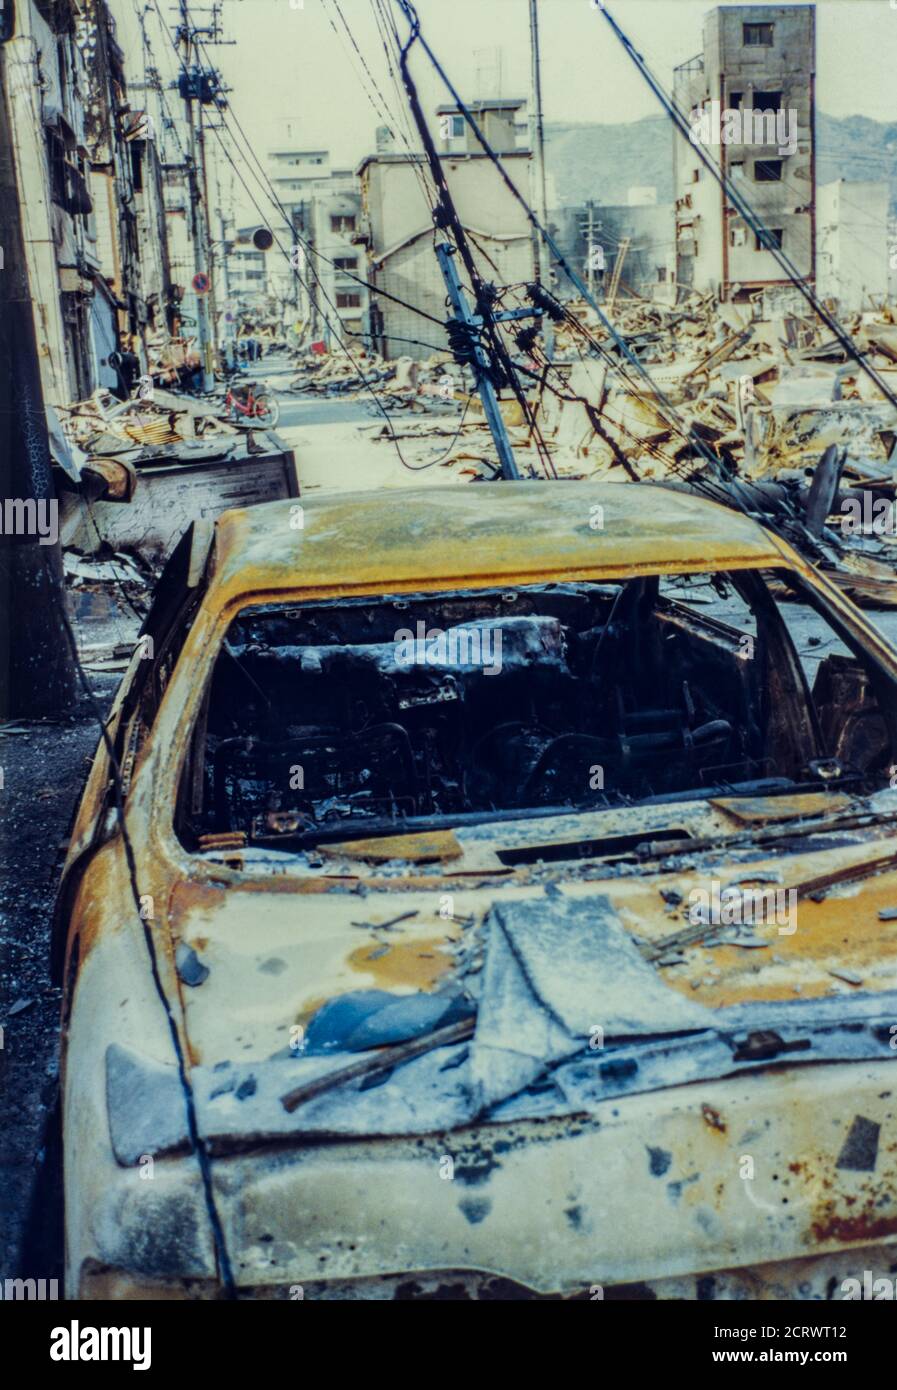 Ruins of a completely burned car among the aftermath of the damage caused from the 1995 Great Hanshin Earthquake in Kobe, Japan Stock Photo